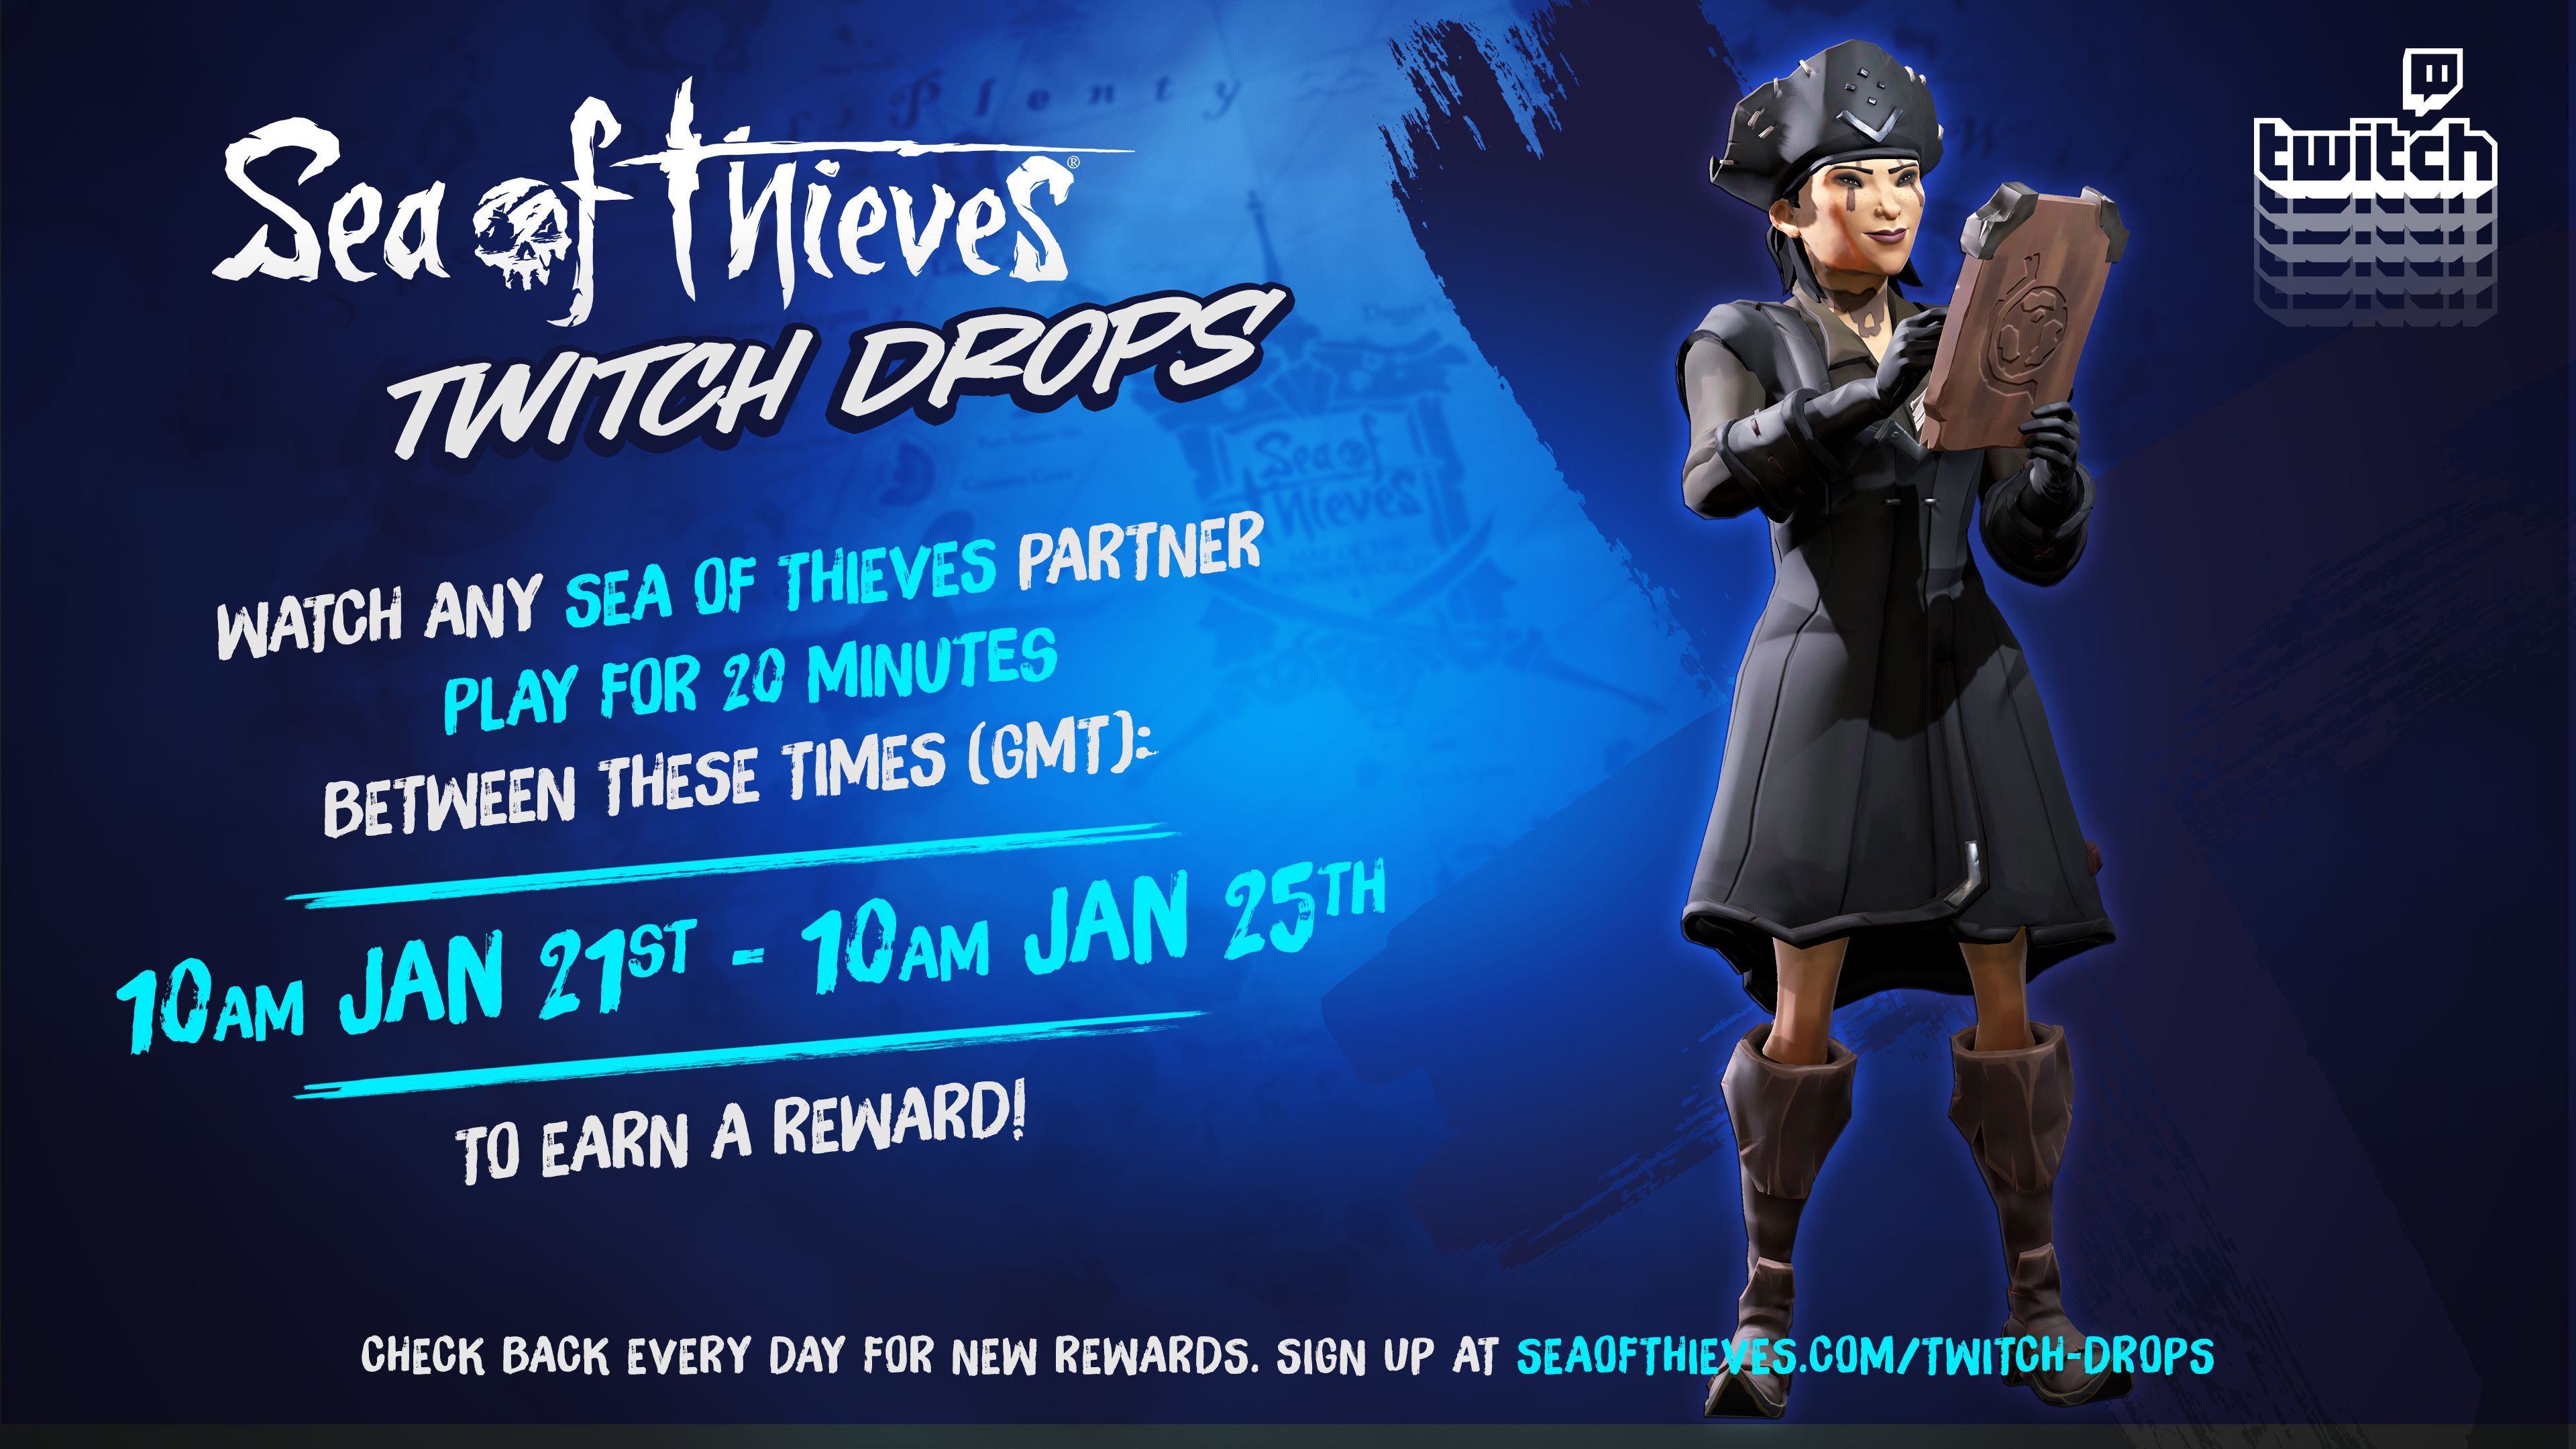 Sea Of Thieves Snag Three More Pieces Of The Dusky Twilight Hunter Gear Plus A Flirtatious Emote One Week From Today Via Twitch Drops Earn Them By Watching Mins